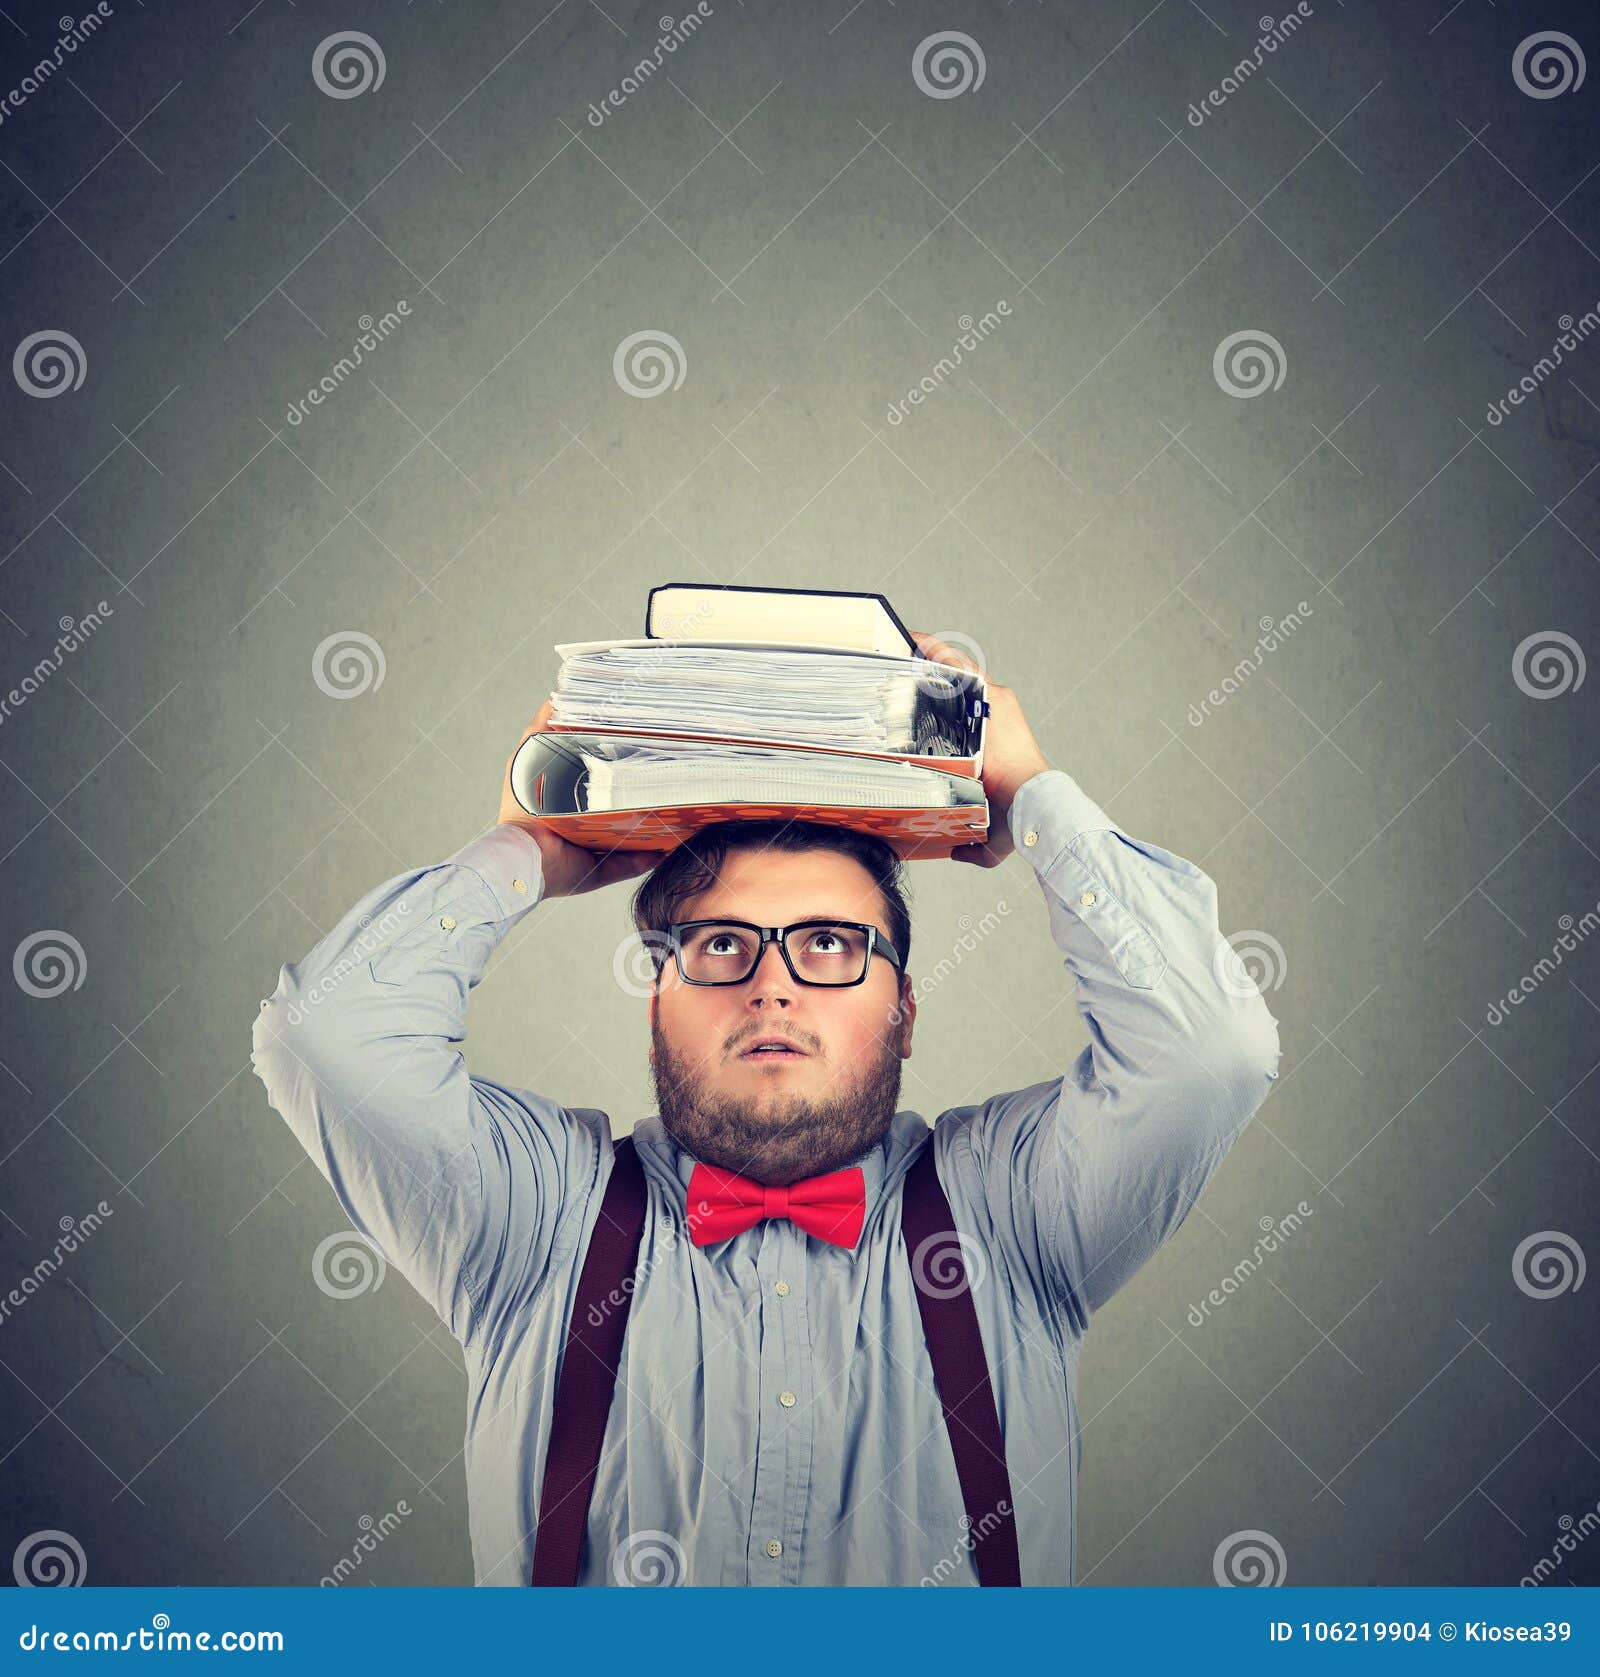 scared man overloaded with studies